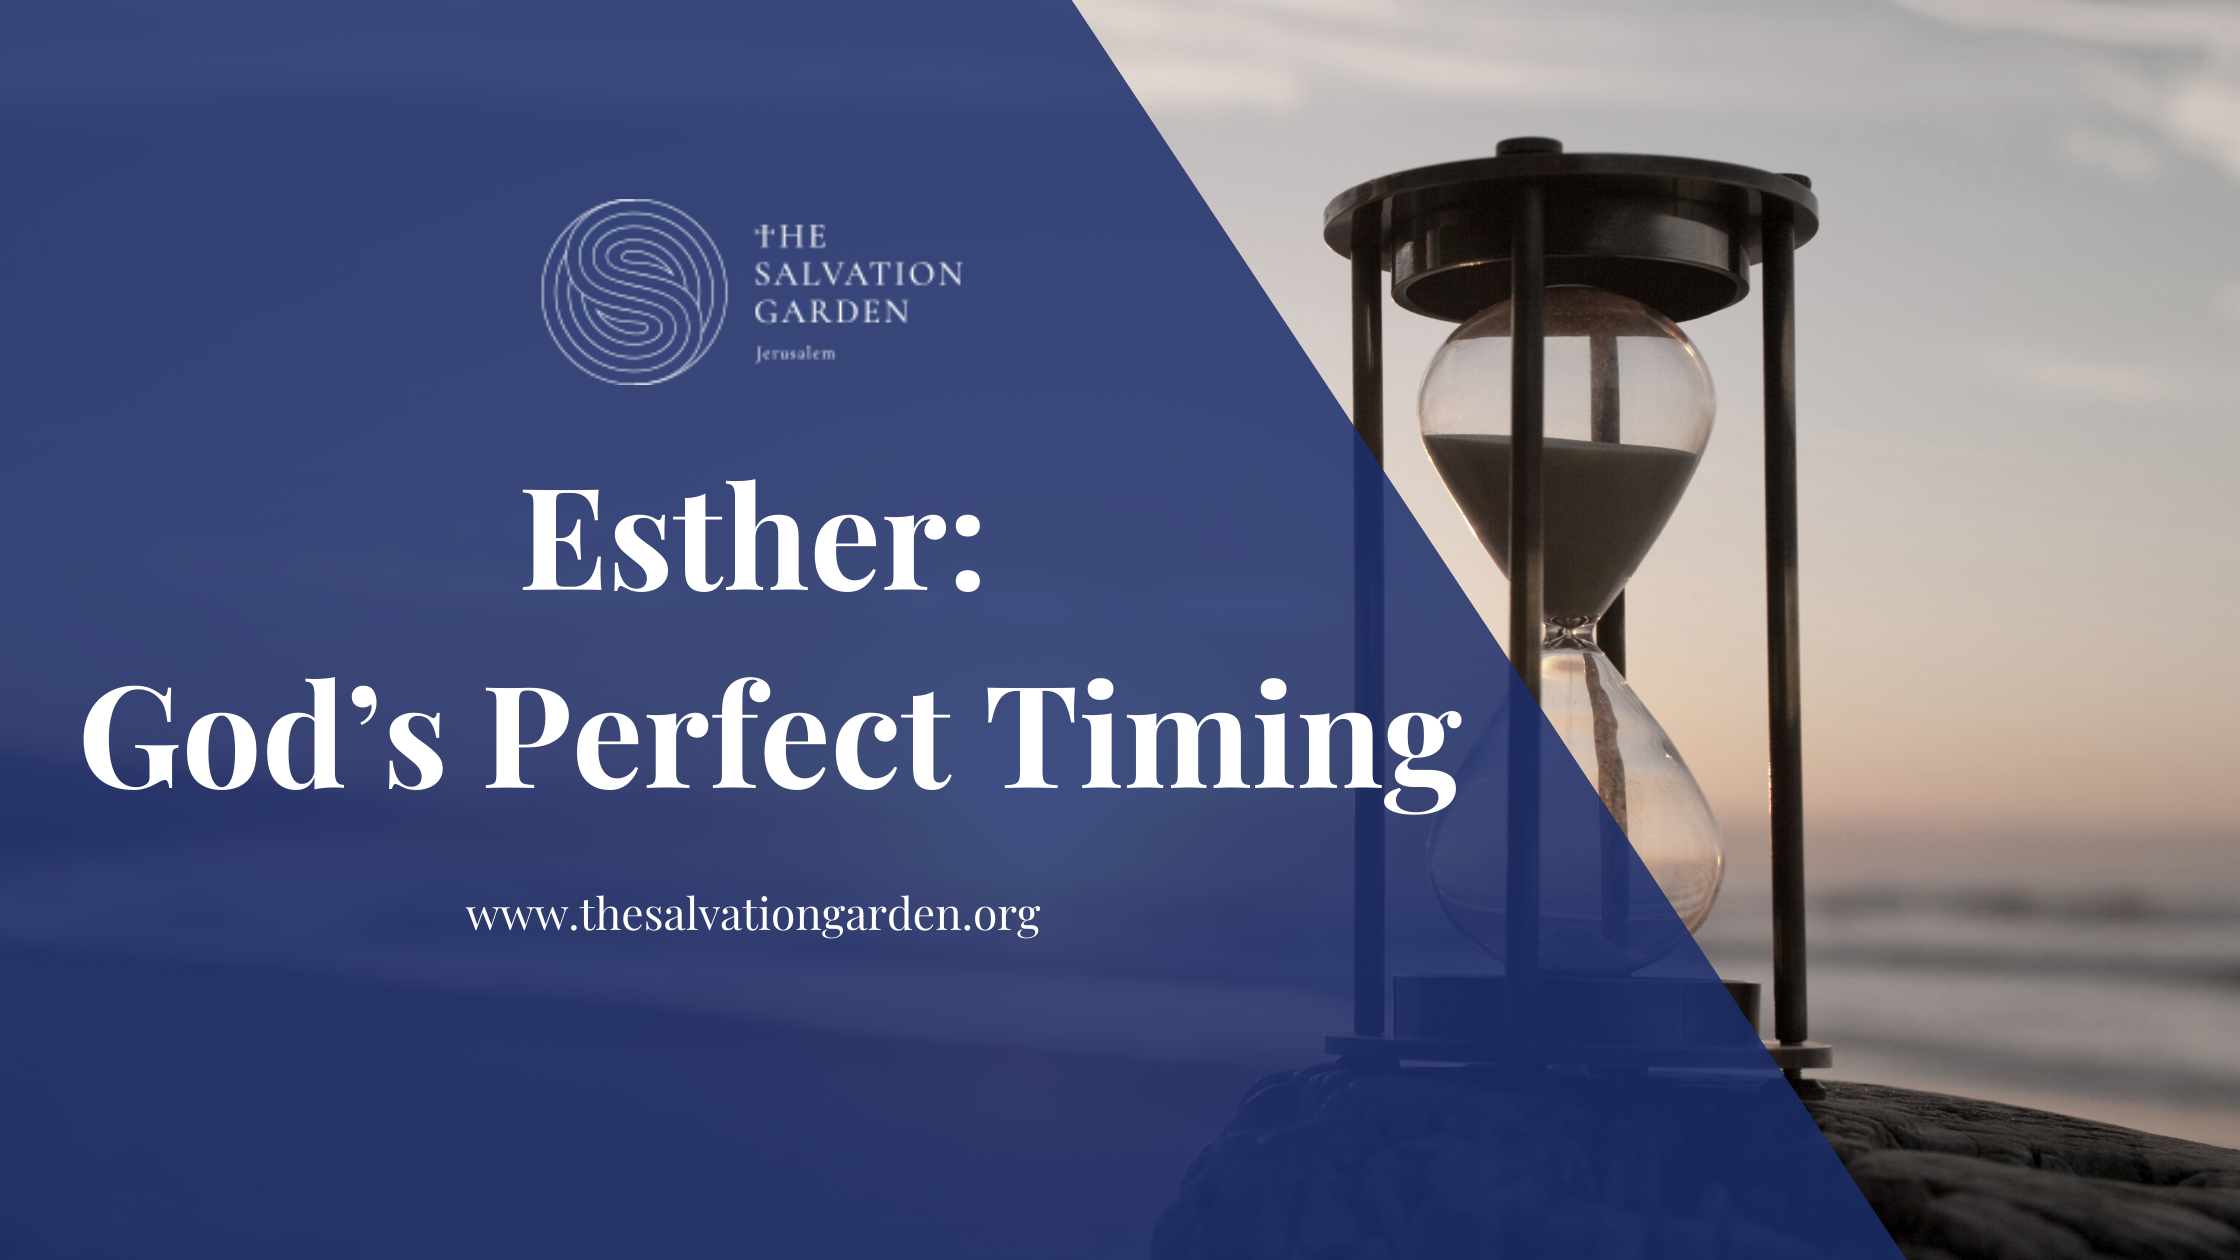 Esther: God’s Perfect Timing